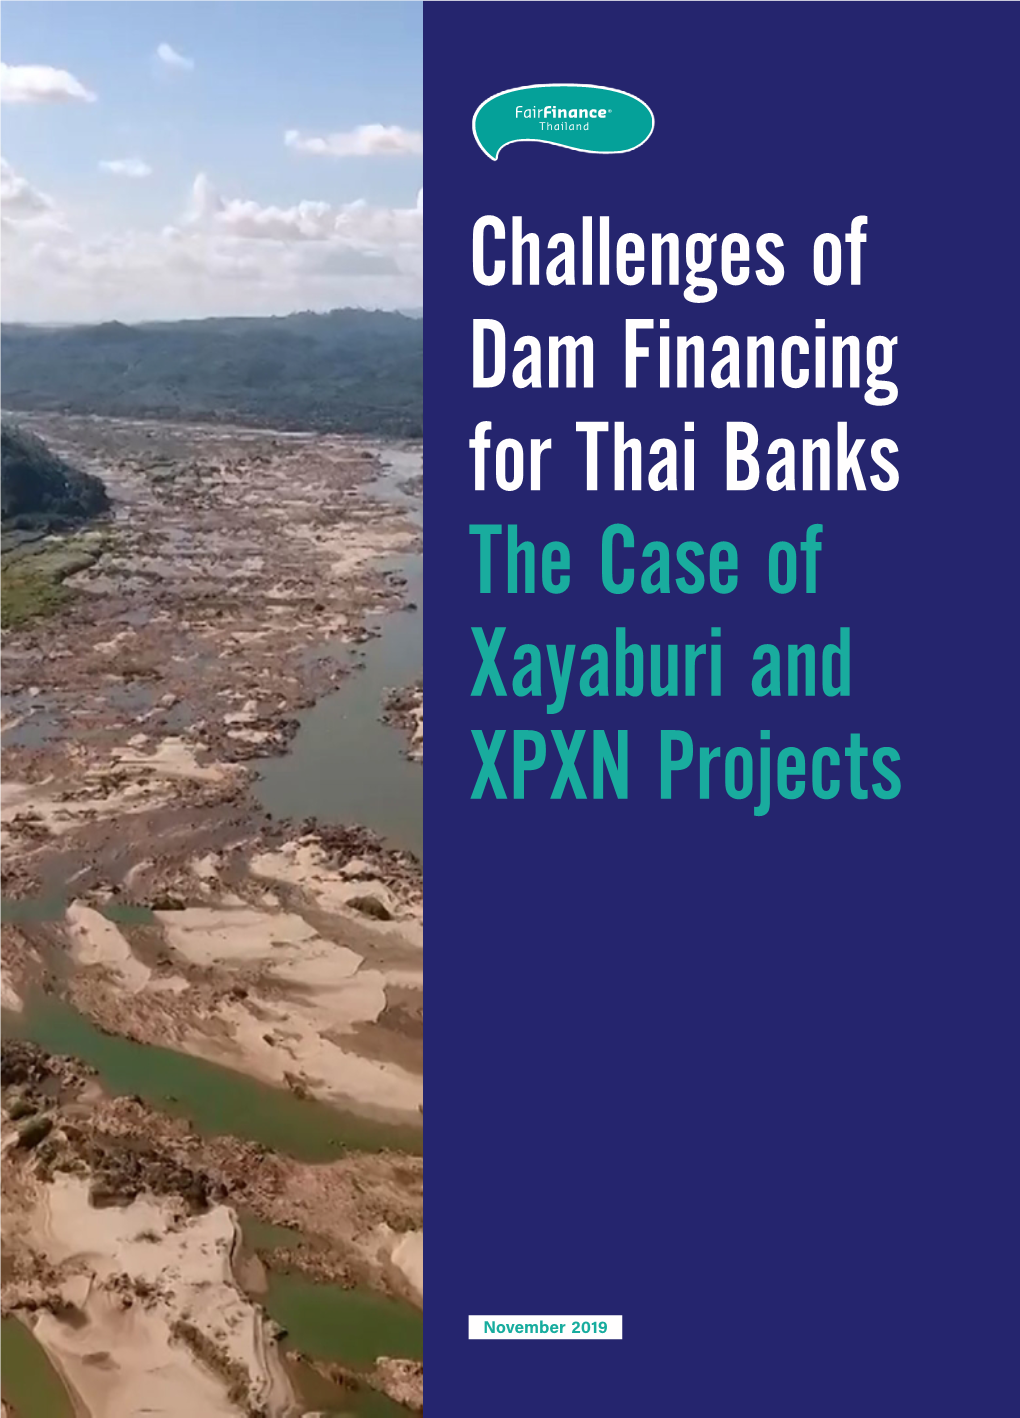 Challenges of Dam Financing for Thai Banks: the Case of Xayaburi and XPXN Projects